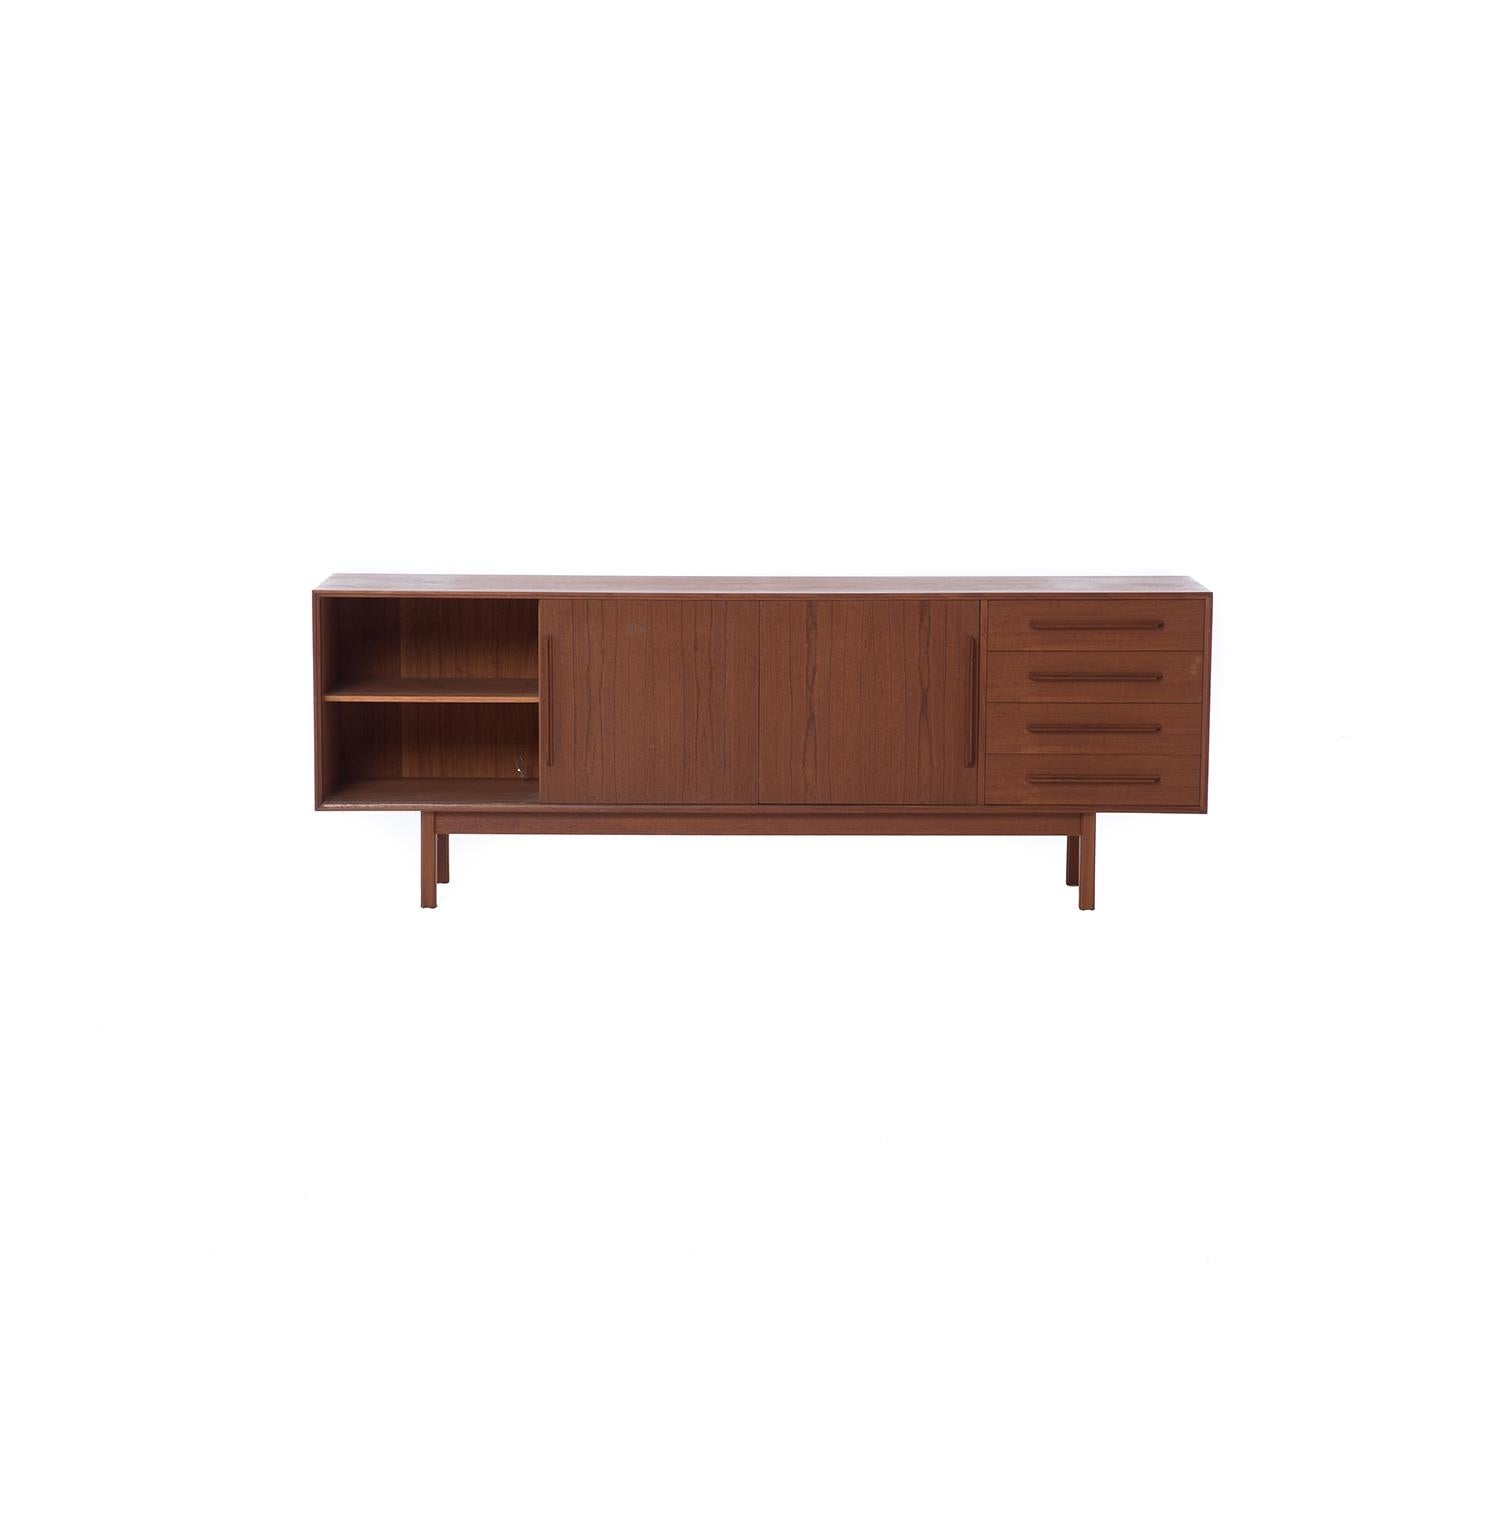 This teak sideboard features three sliding doors and four drawers atop squared legs.